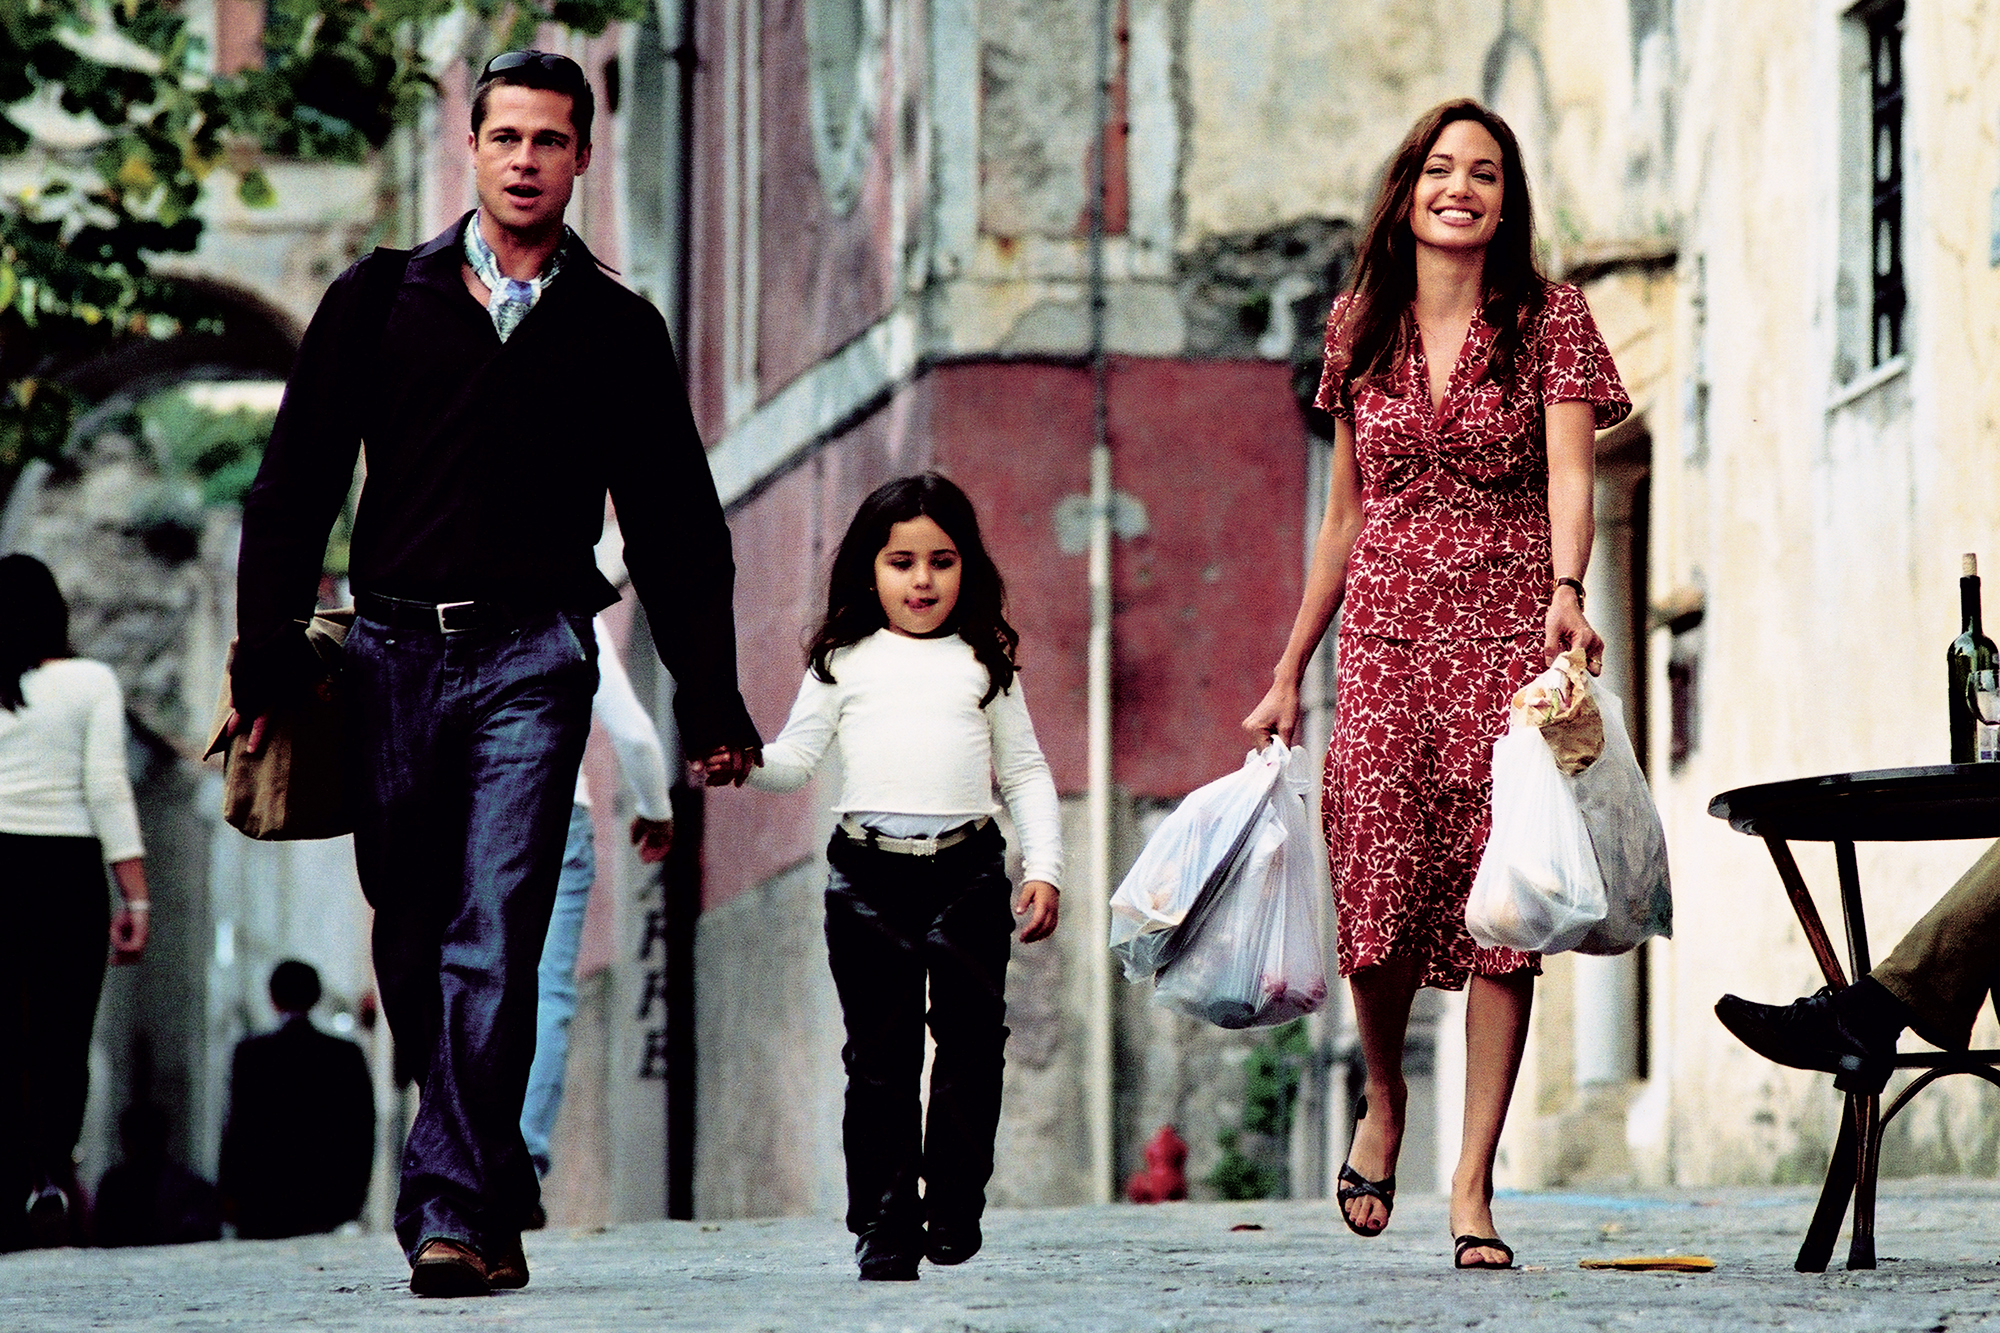 Brad Pitt and Angelina Jolie in southern Italy during the filming of Mr and Mrs Smith, 2004.